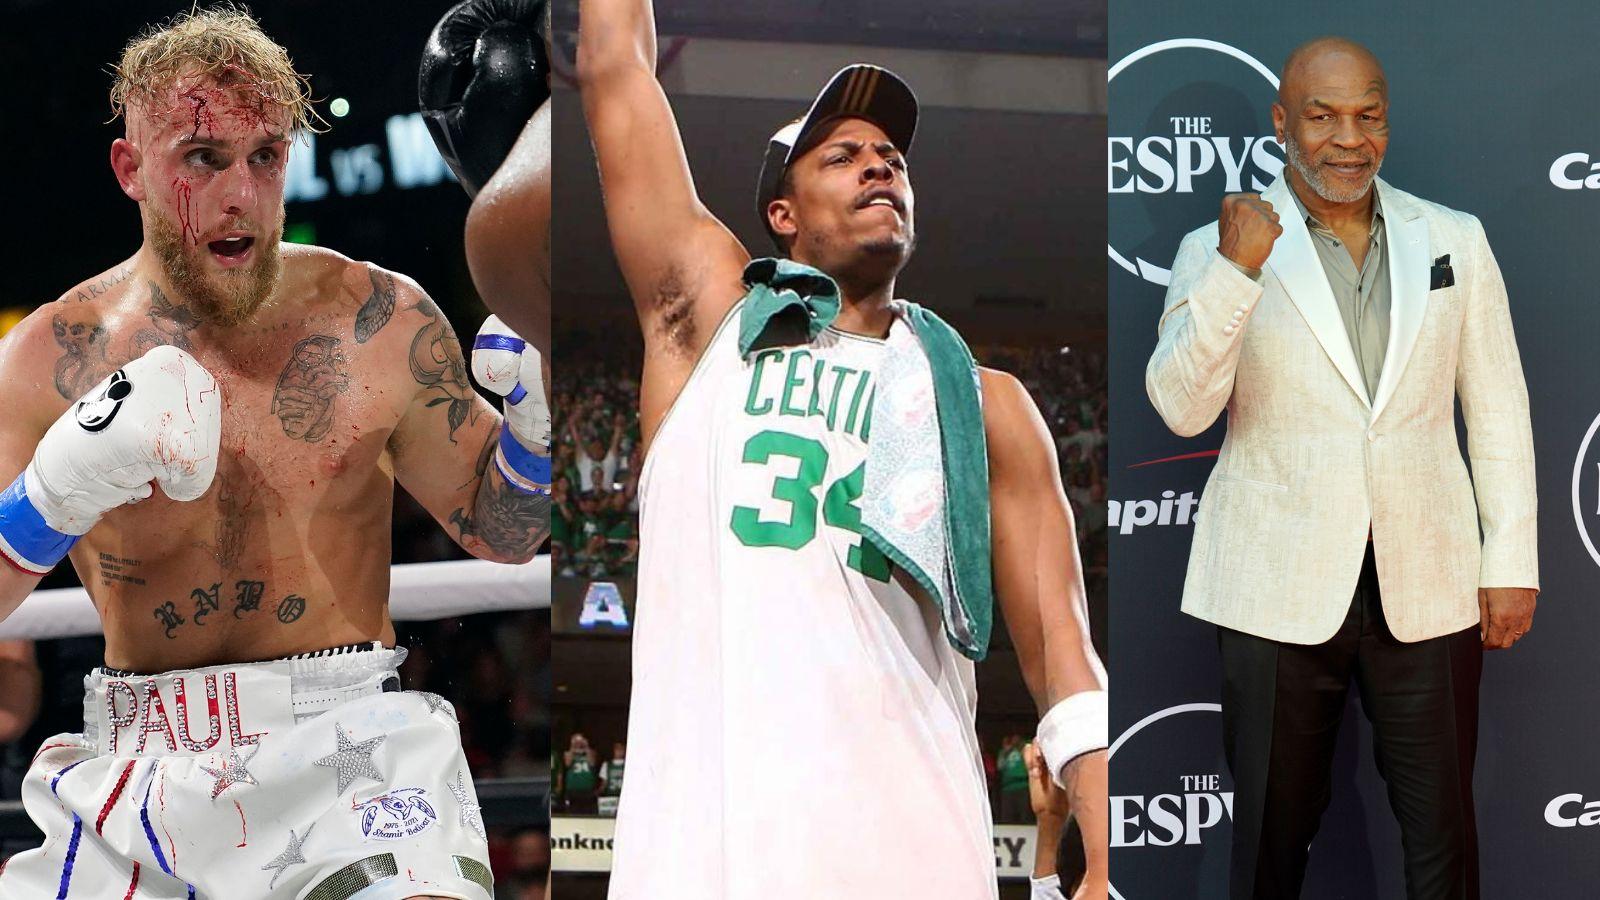 Jake Paul in the boxing ring (left) and Paul Pierce as a member of the Boston Celtics (center) and Mike Tyson at the ESPY's (right).